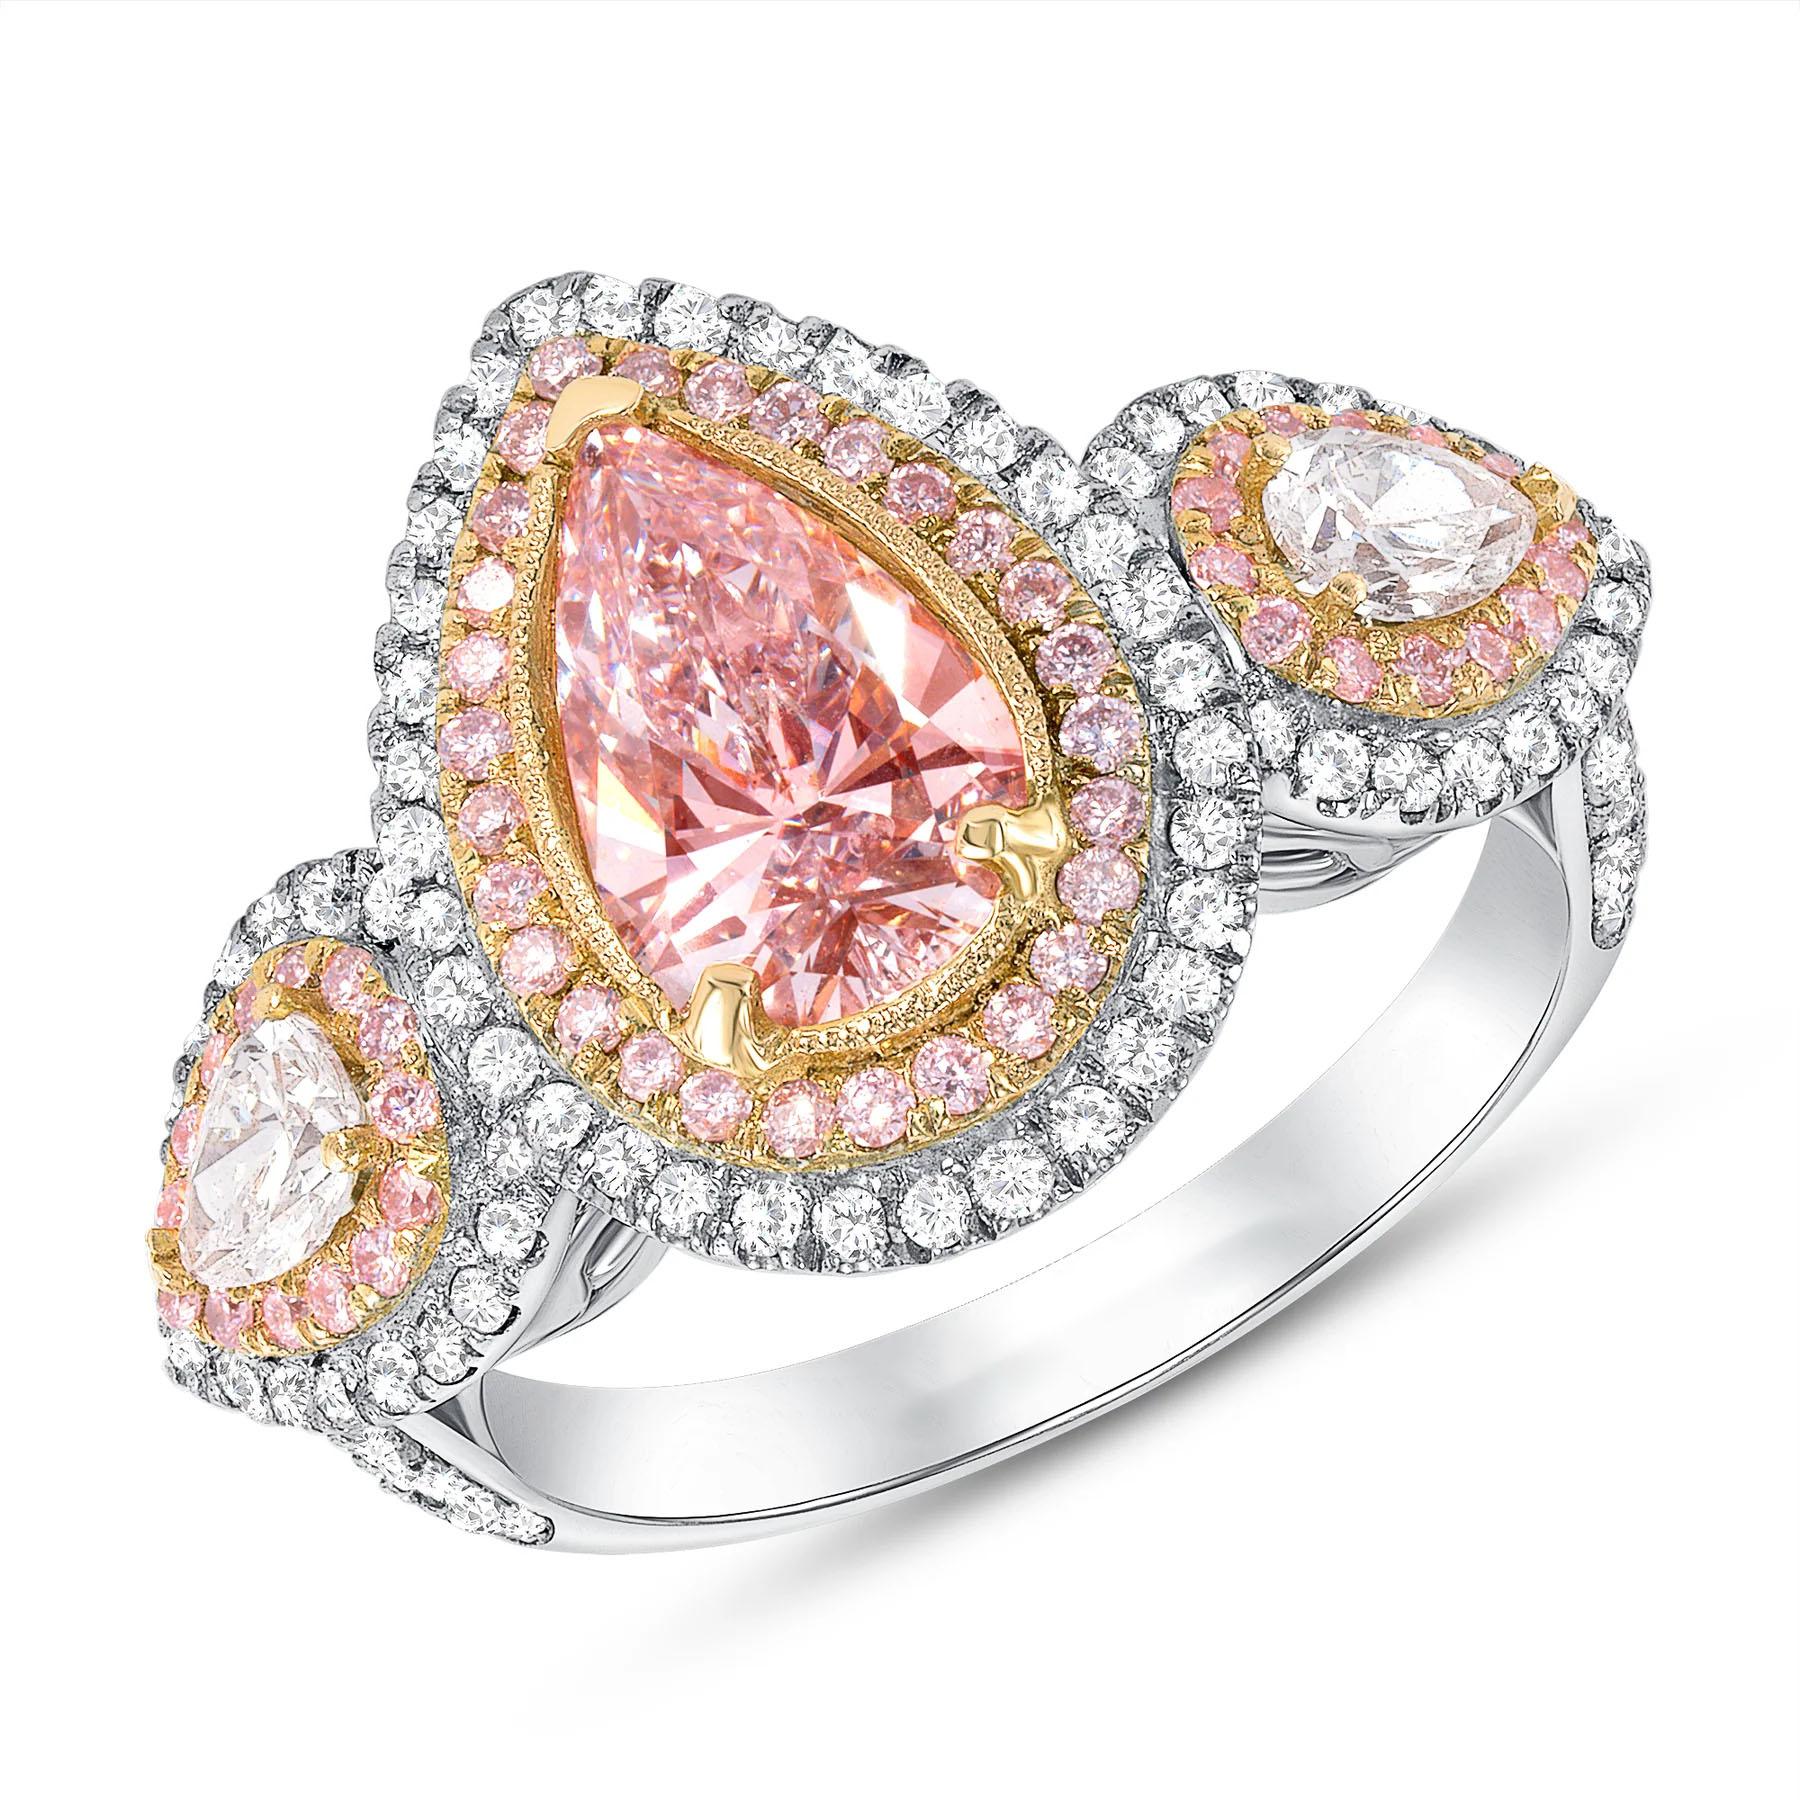 For Sale:  Helena's Pink Pear Shaped Halo Engagement Ring 4